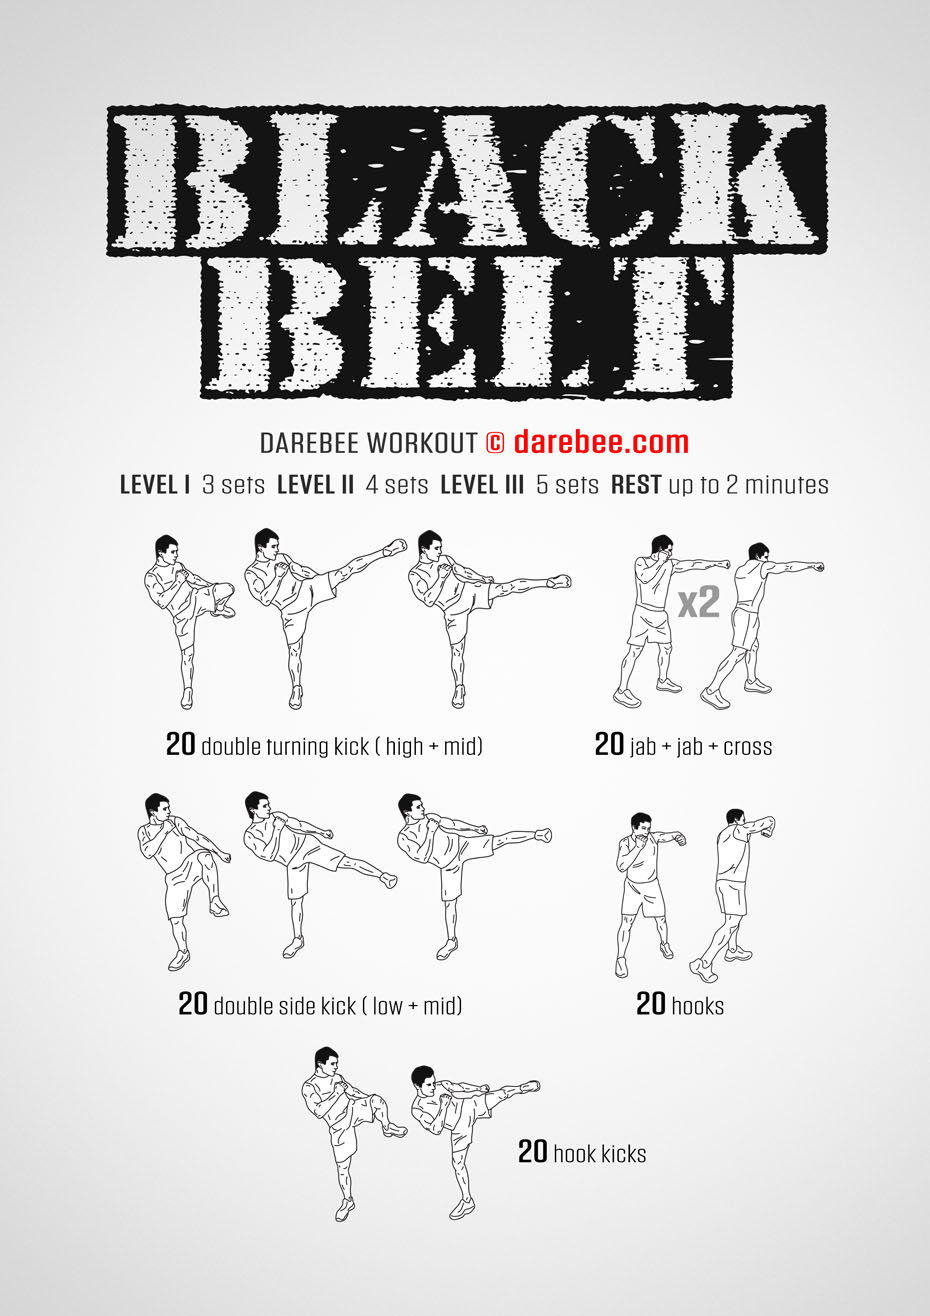 Black Belt is a DAREBEE no equipment total body combat moves based fitness you can try in he comfort of your home to help you improve inside and out.